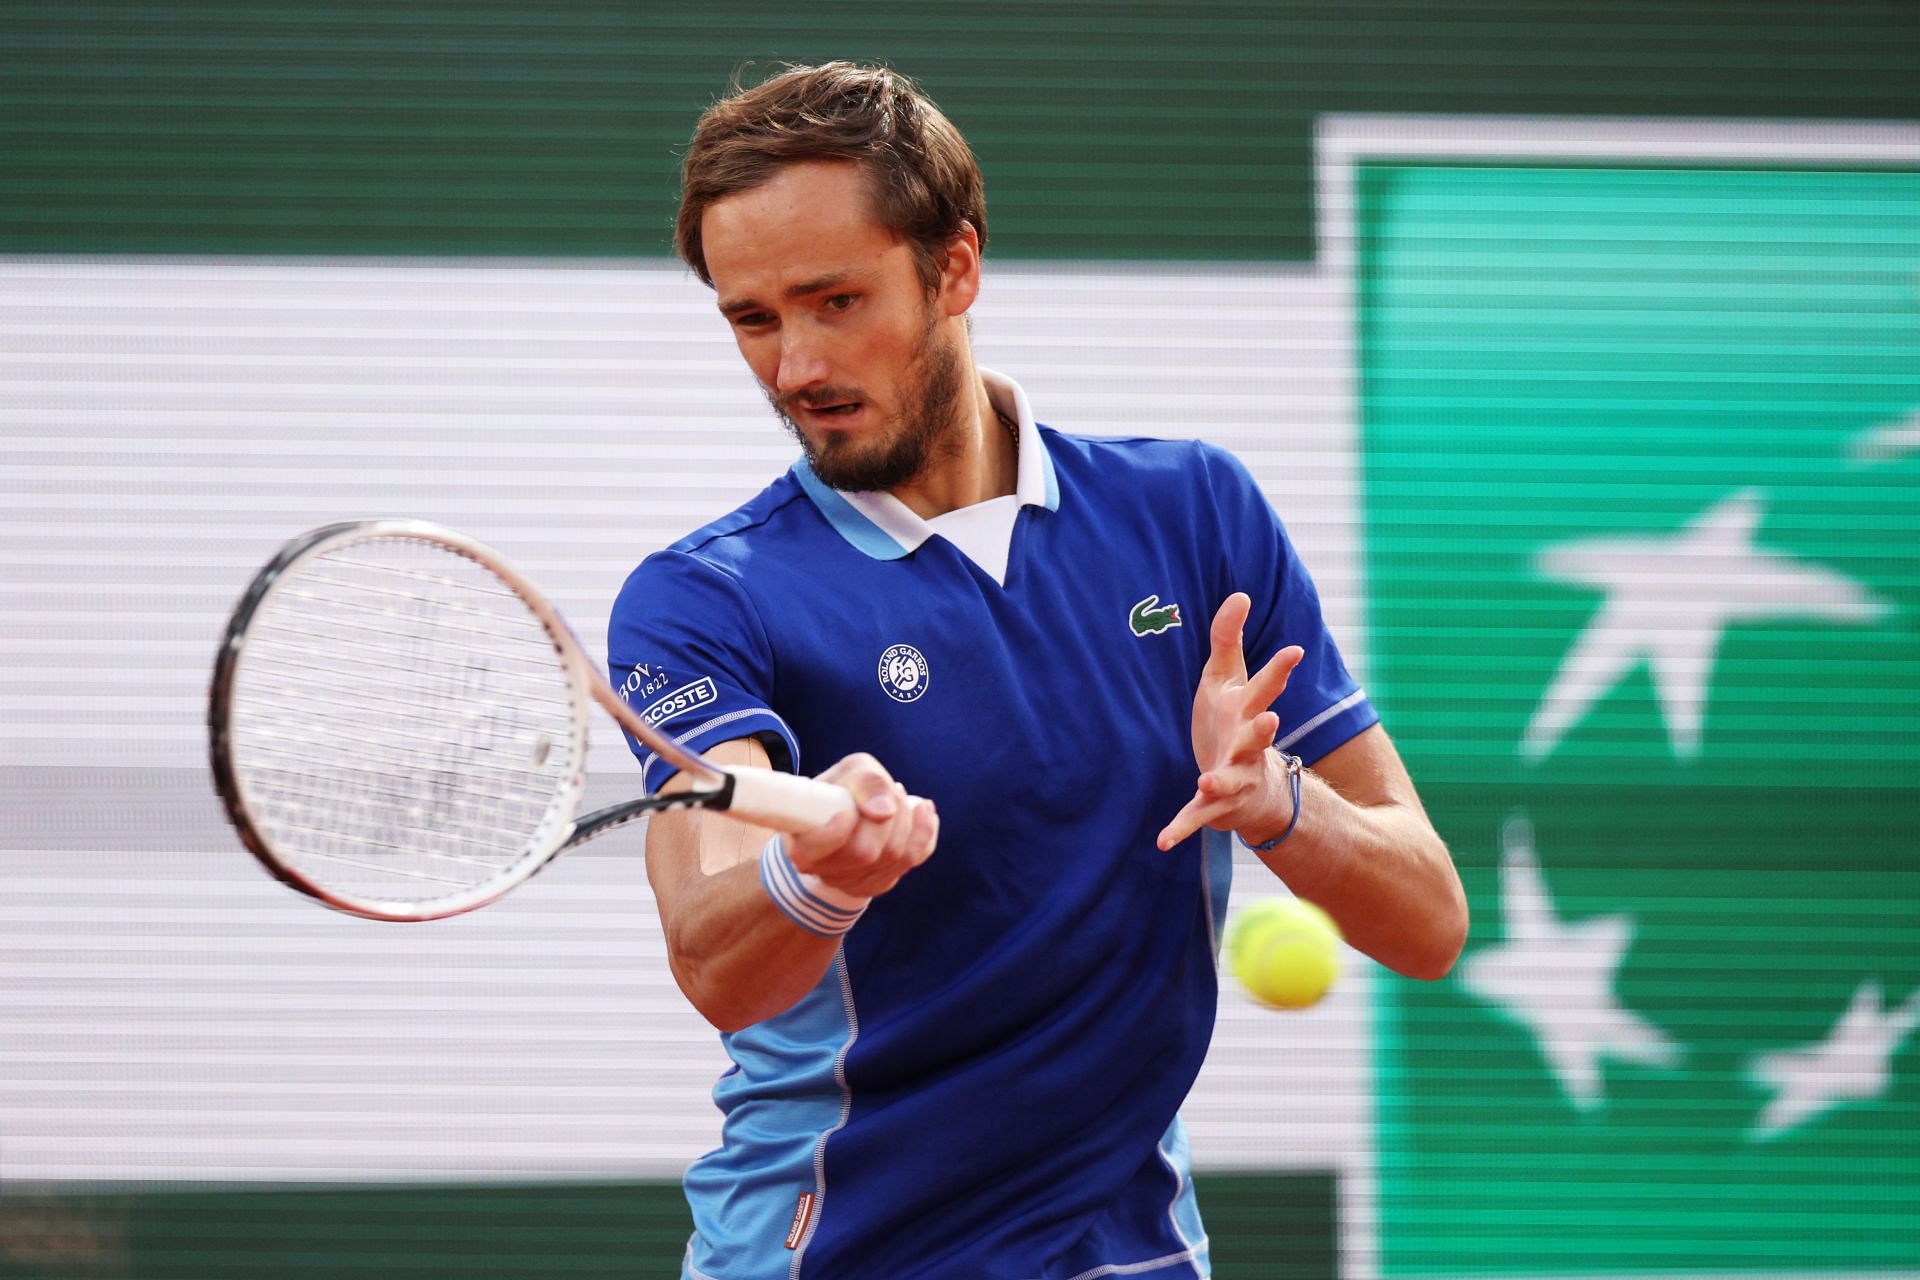 Daniil Medvedev and Andrey Rublev could meet in the semifinals of the Halle Open